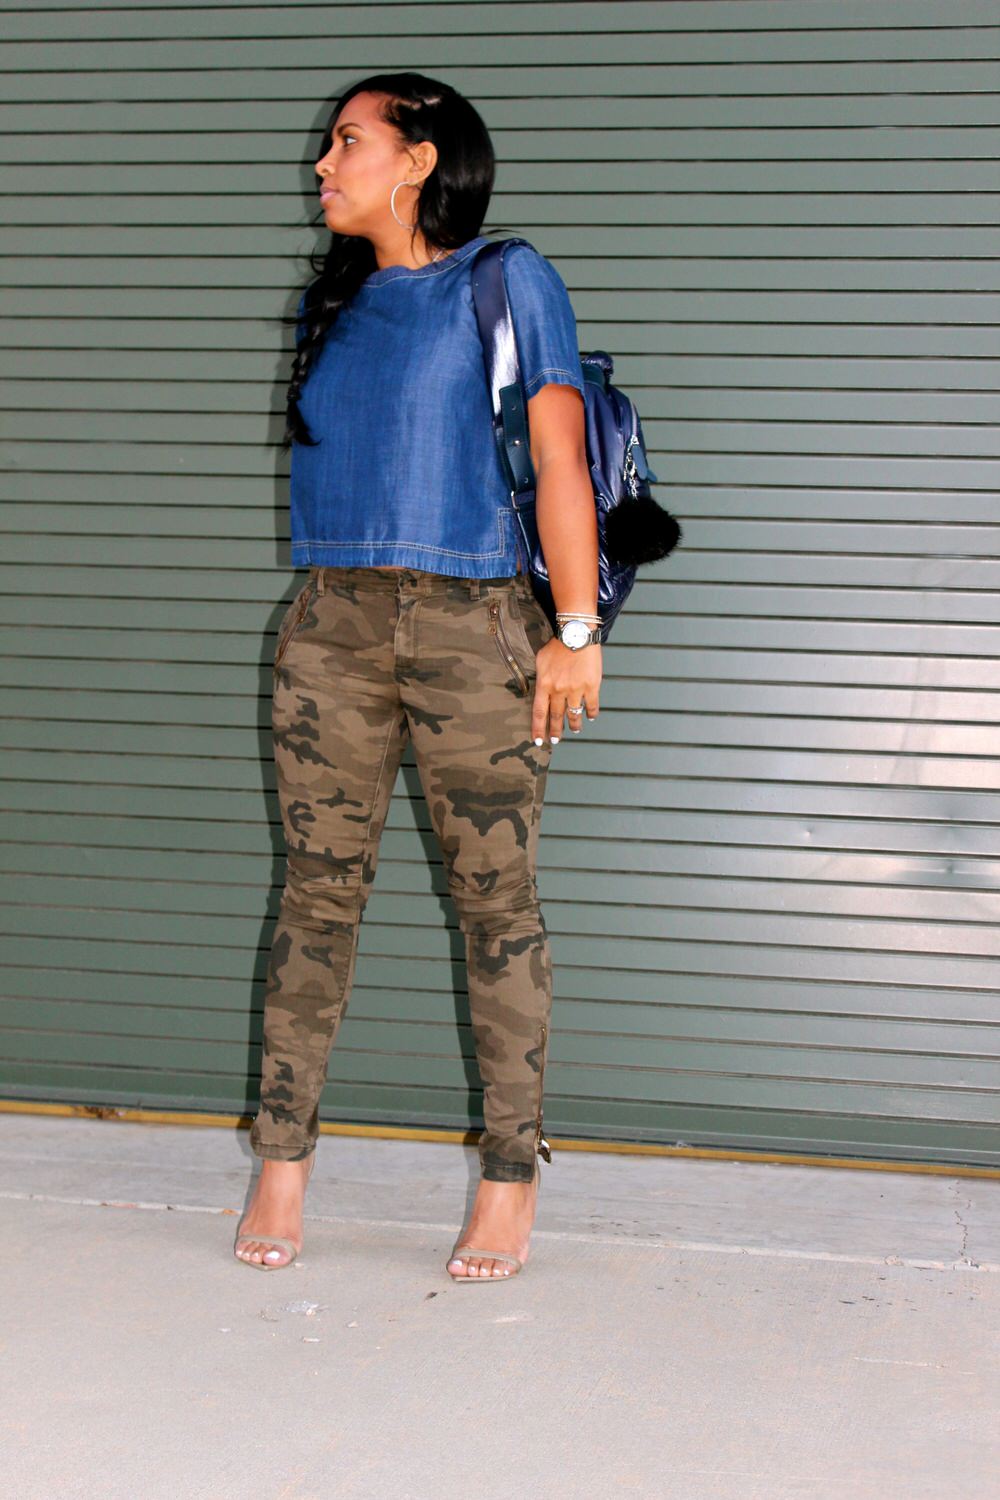 Denim top, Camouflage Pants, Givenchy Heels